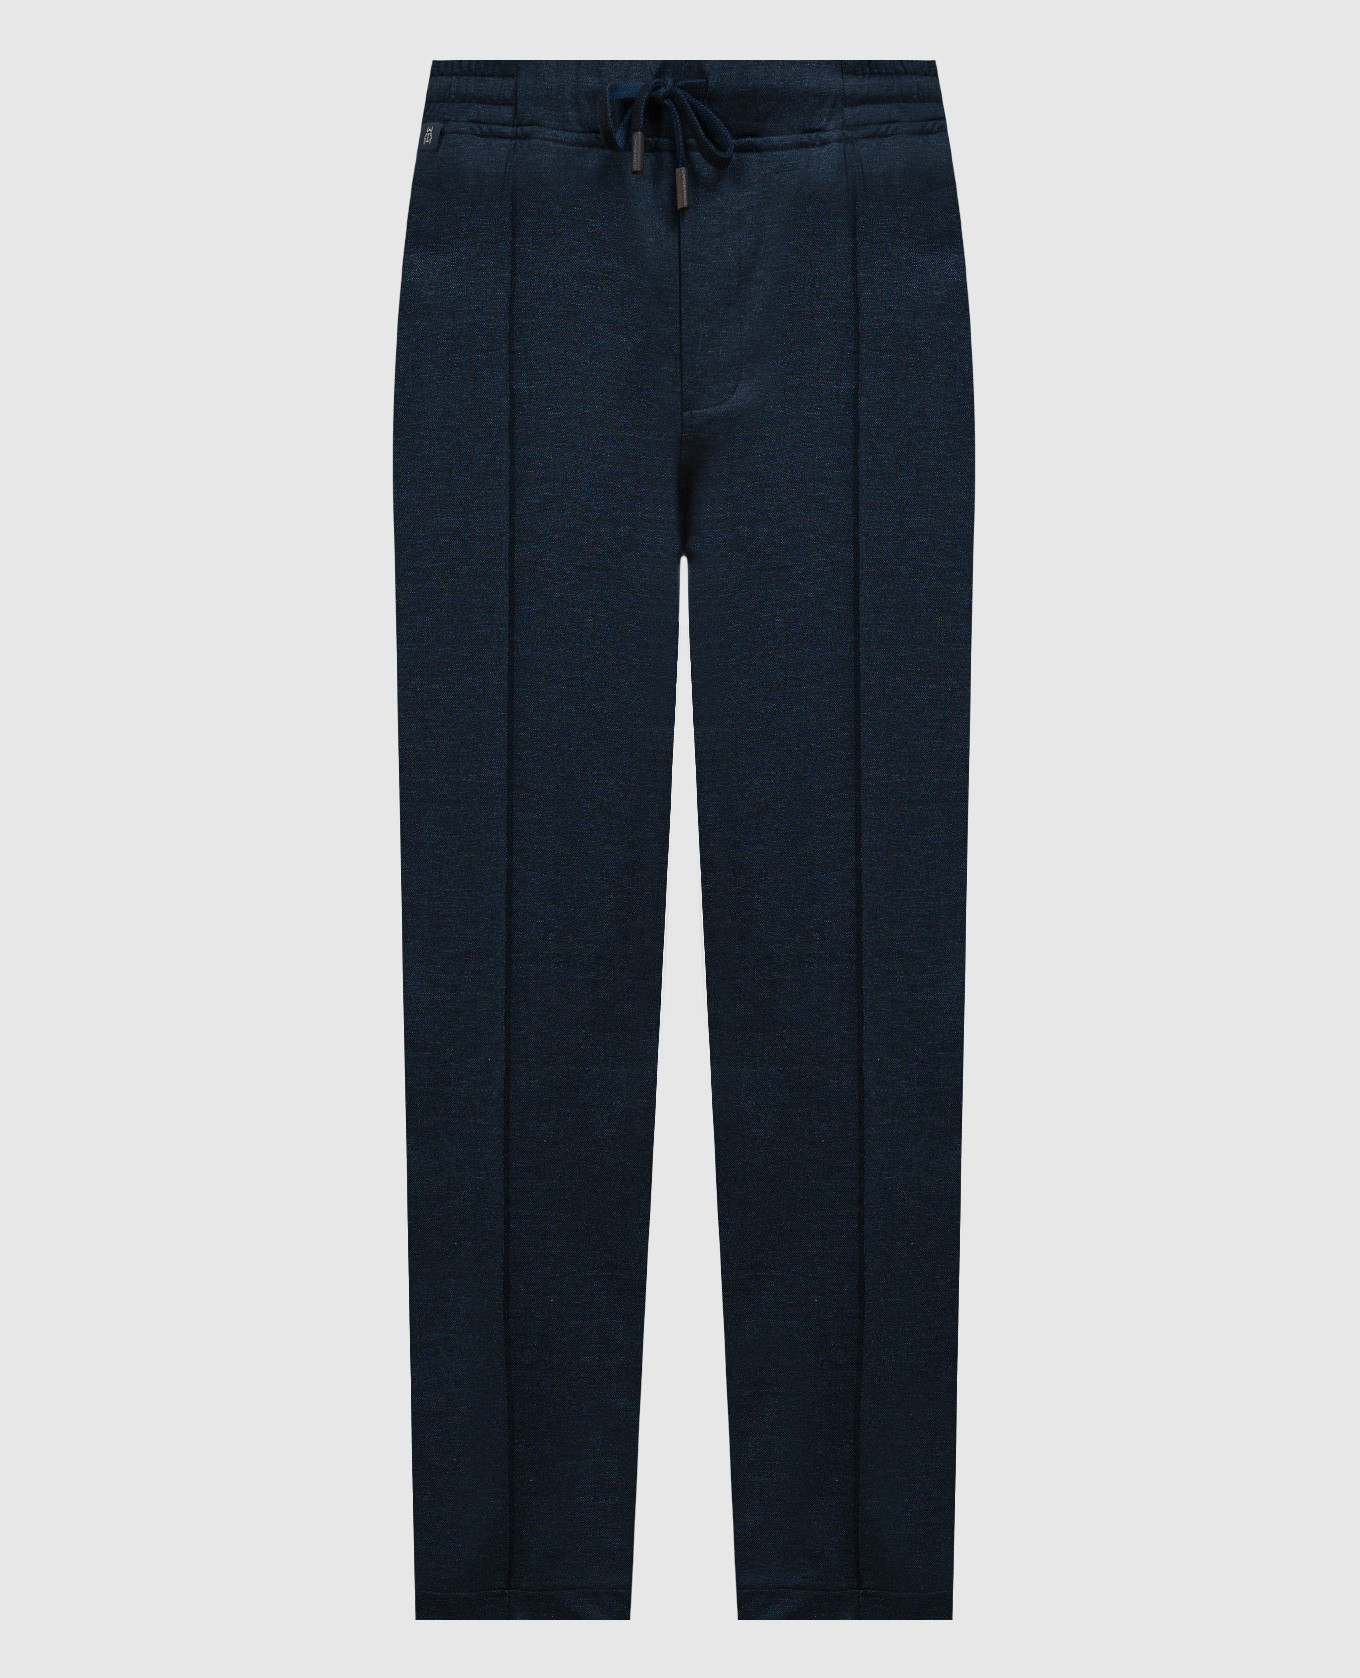 Blue sweatpants with a logo patch